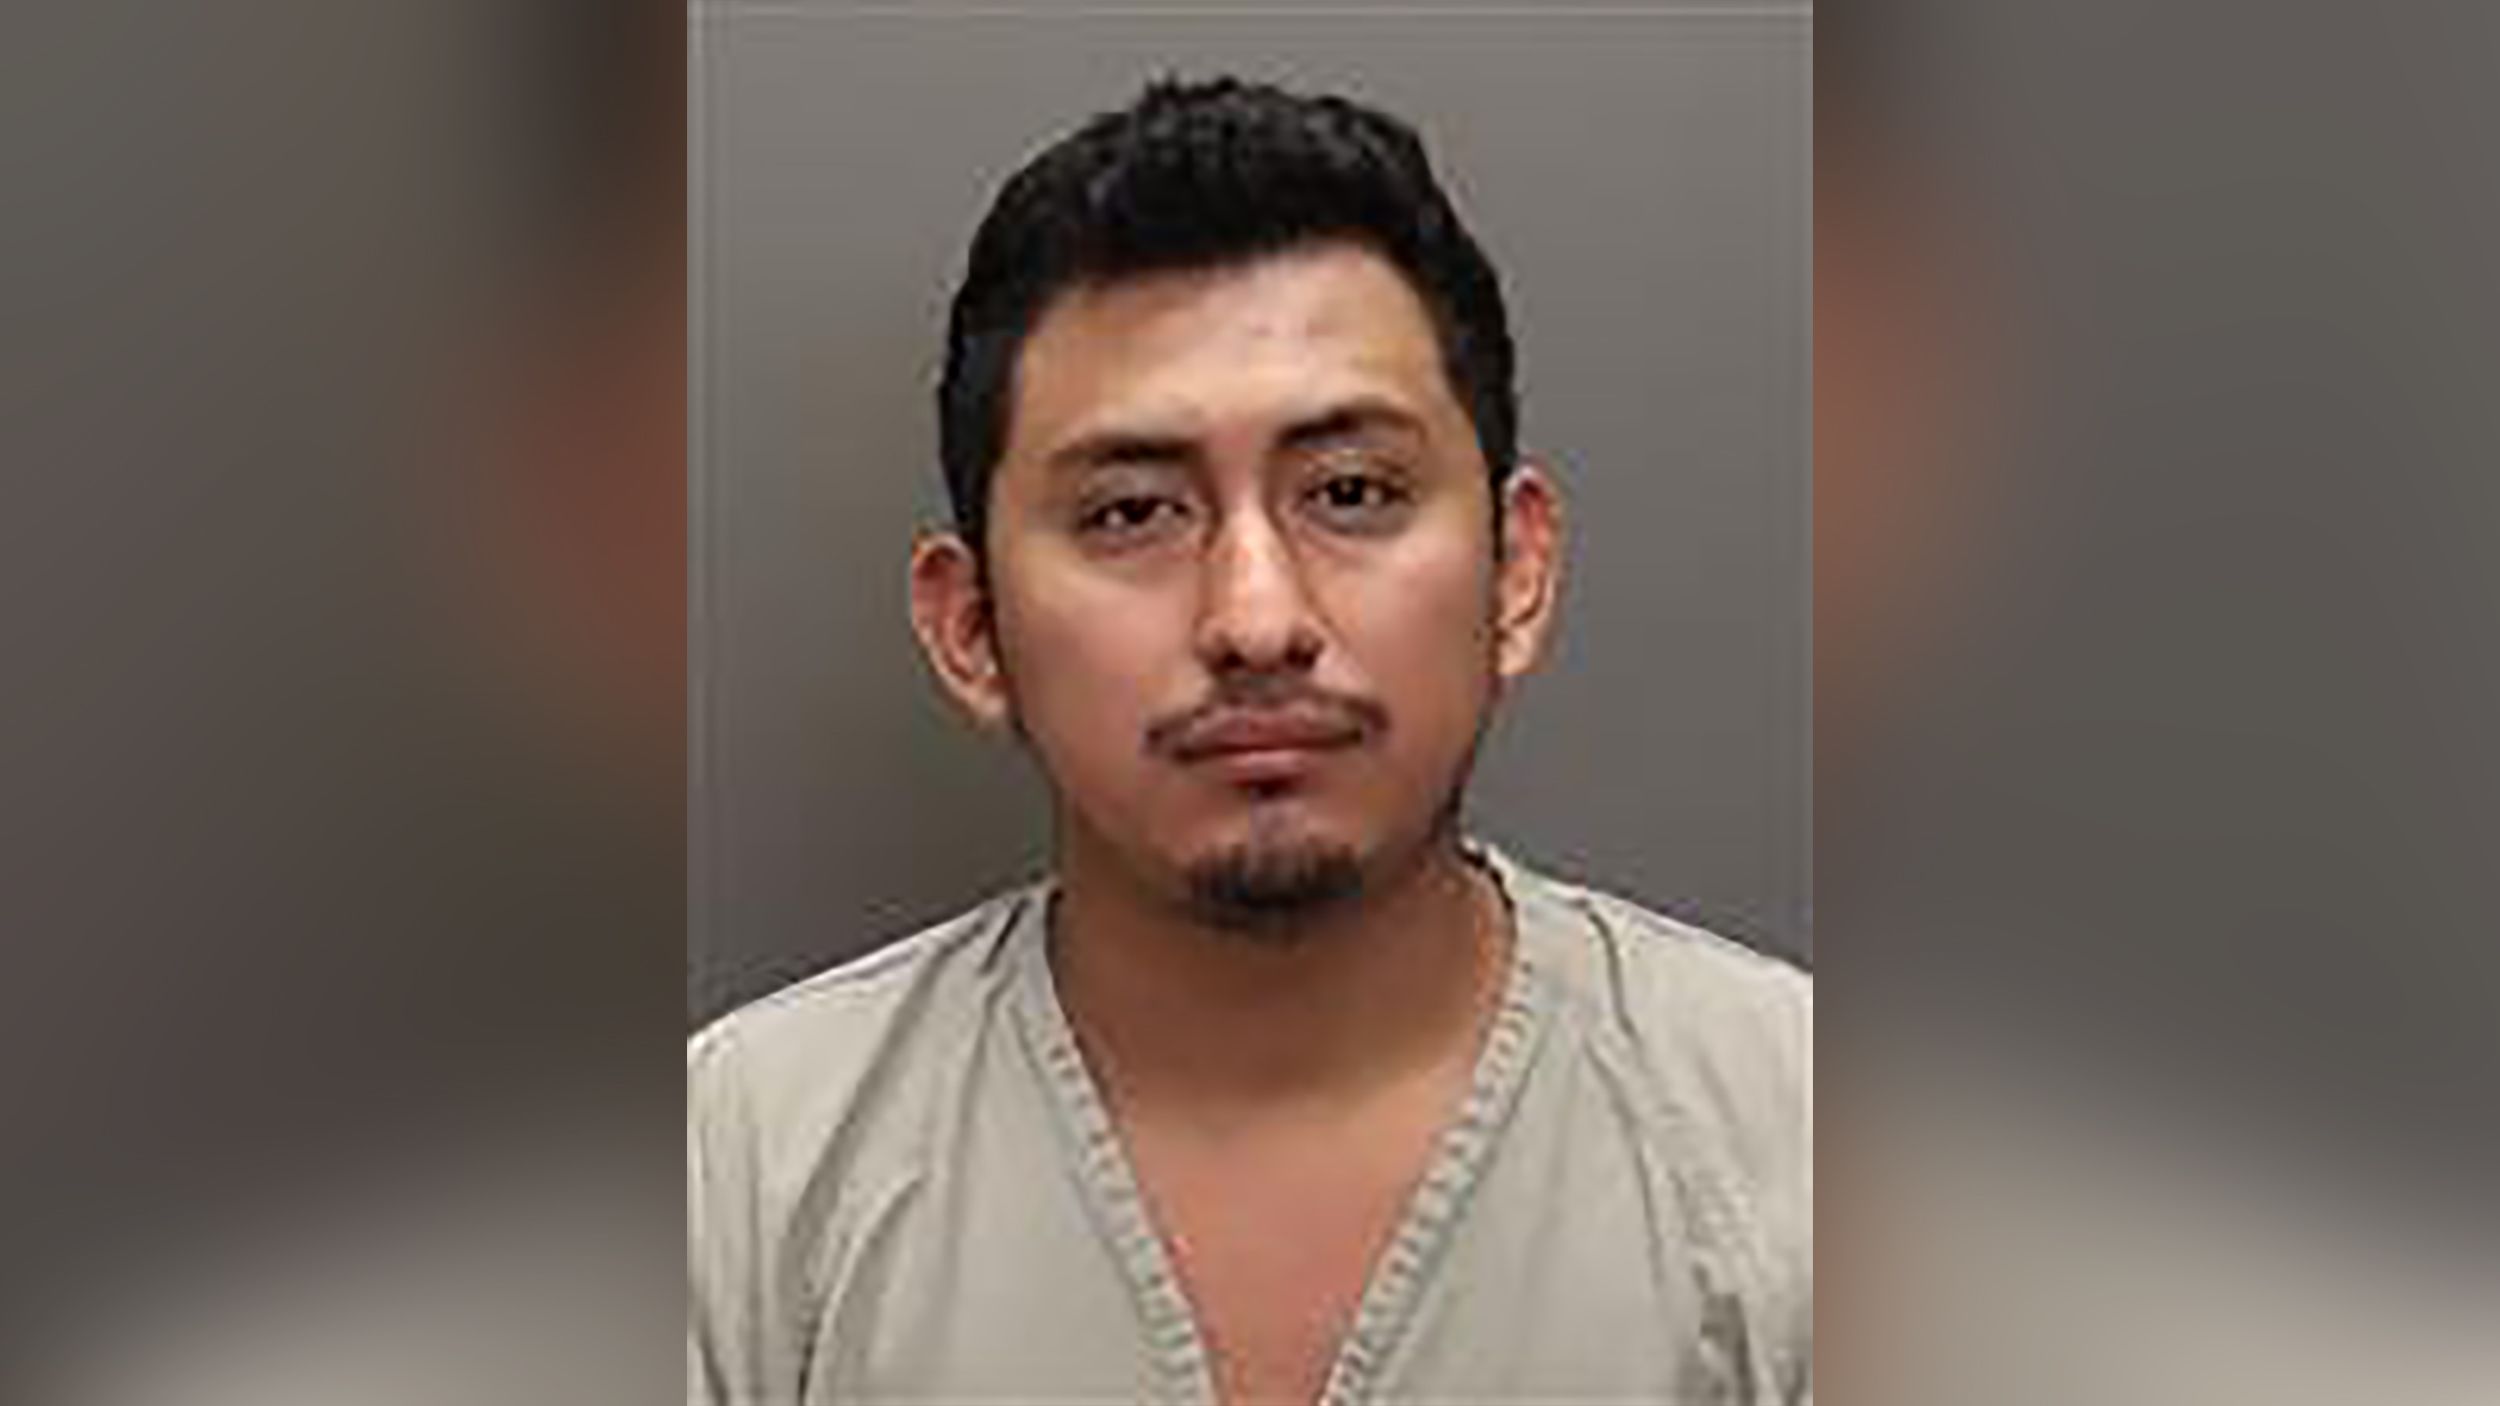 Www Pregnent Anty Rep Sex - Gerson Fuentes was charged in the rape of a 10-year-old Ohio girl who  traveled to Indiana for an abortion | CNN